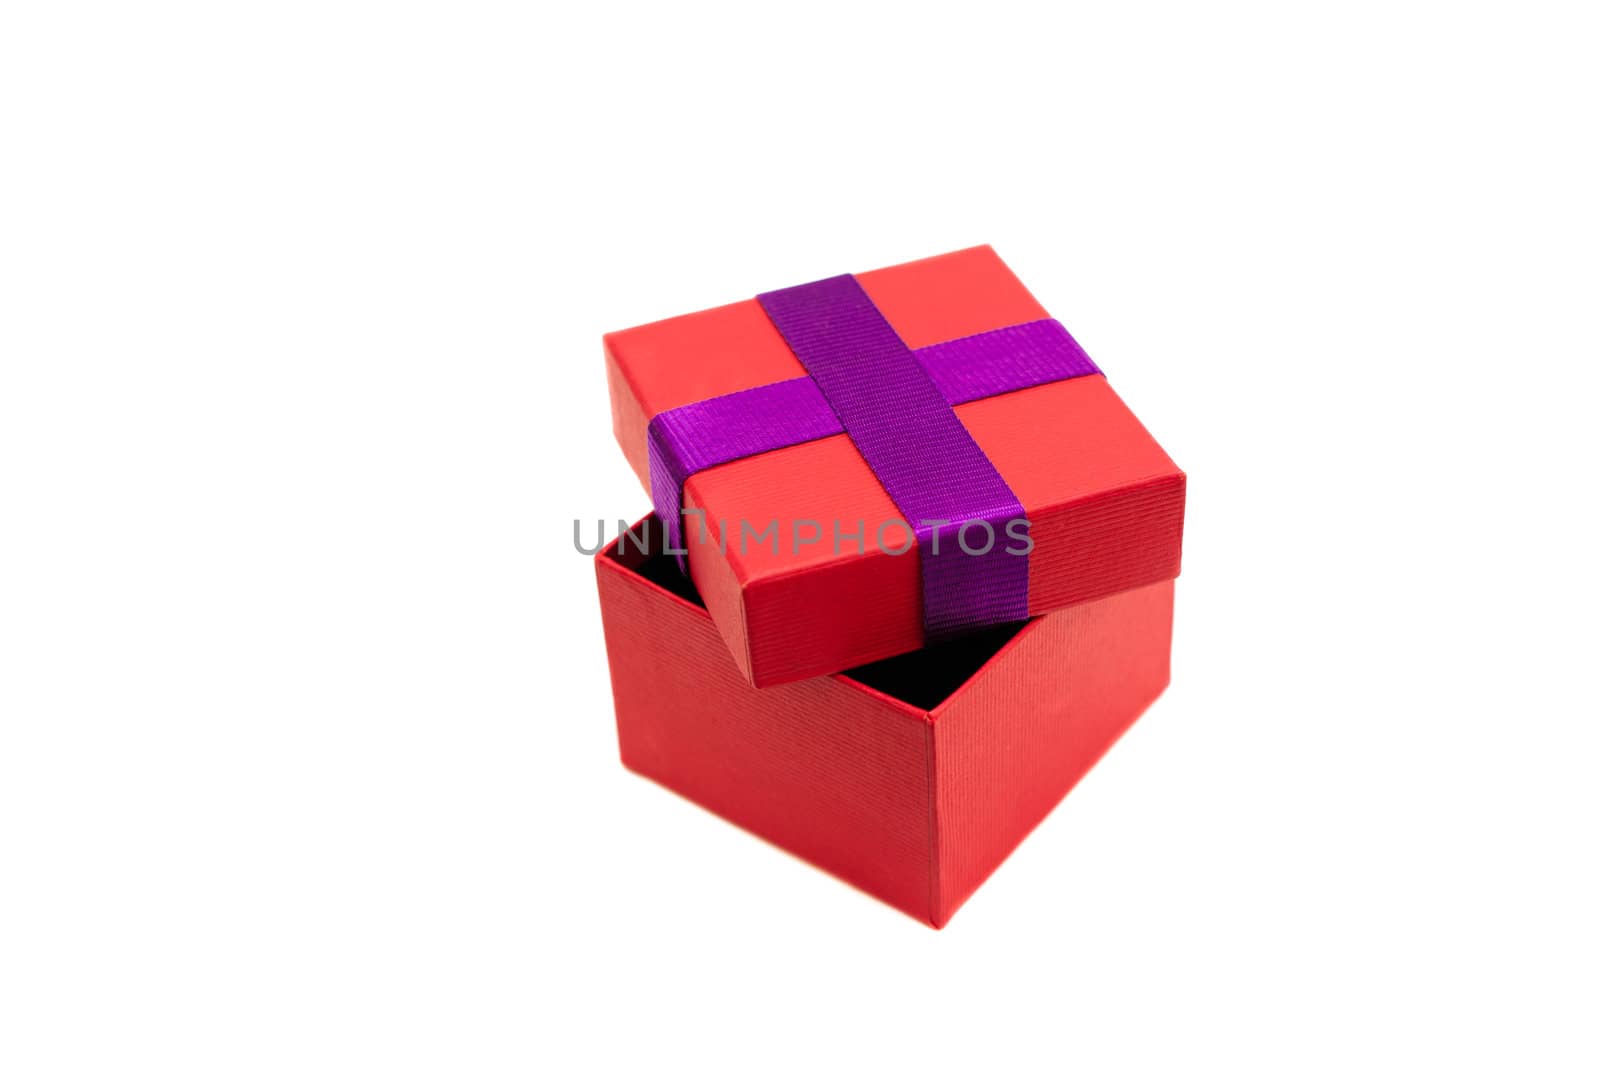 Isolated red purple present box by oguzdkn